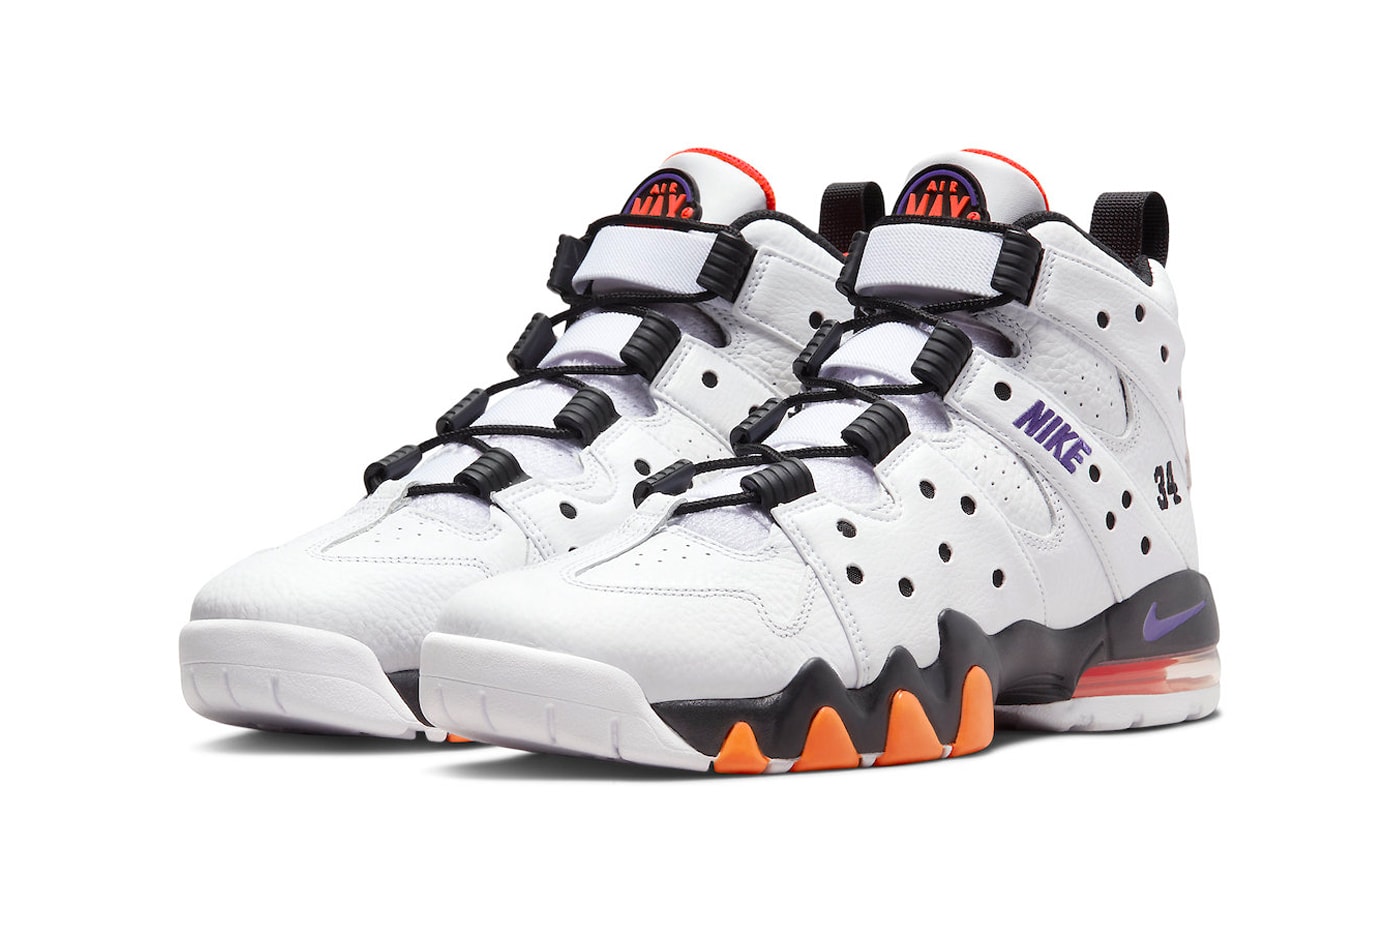 Nike Air Max CB 94 Suns Official Look Release Info do5880-100 Charles Barkley